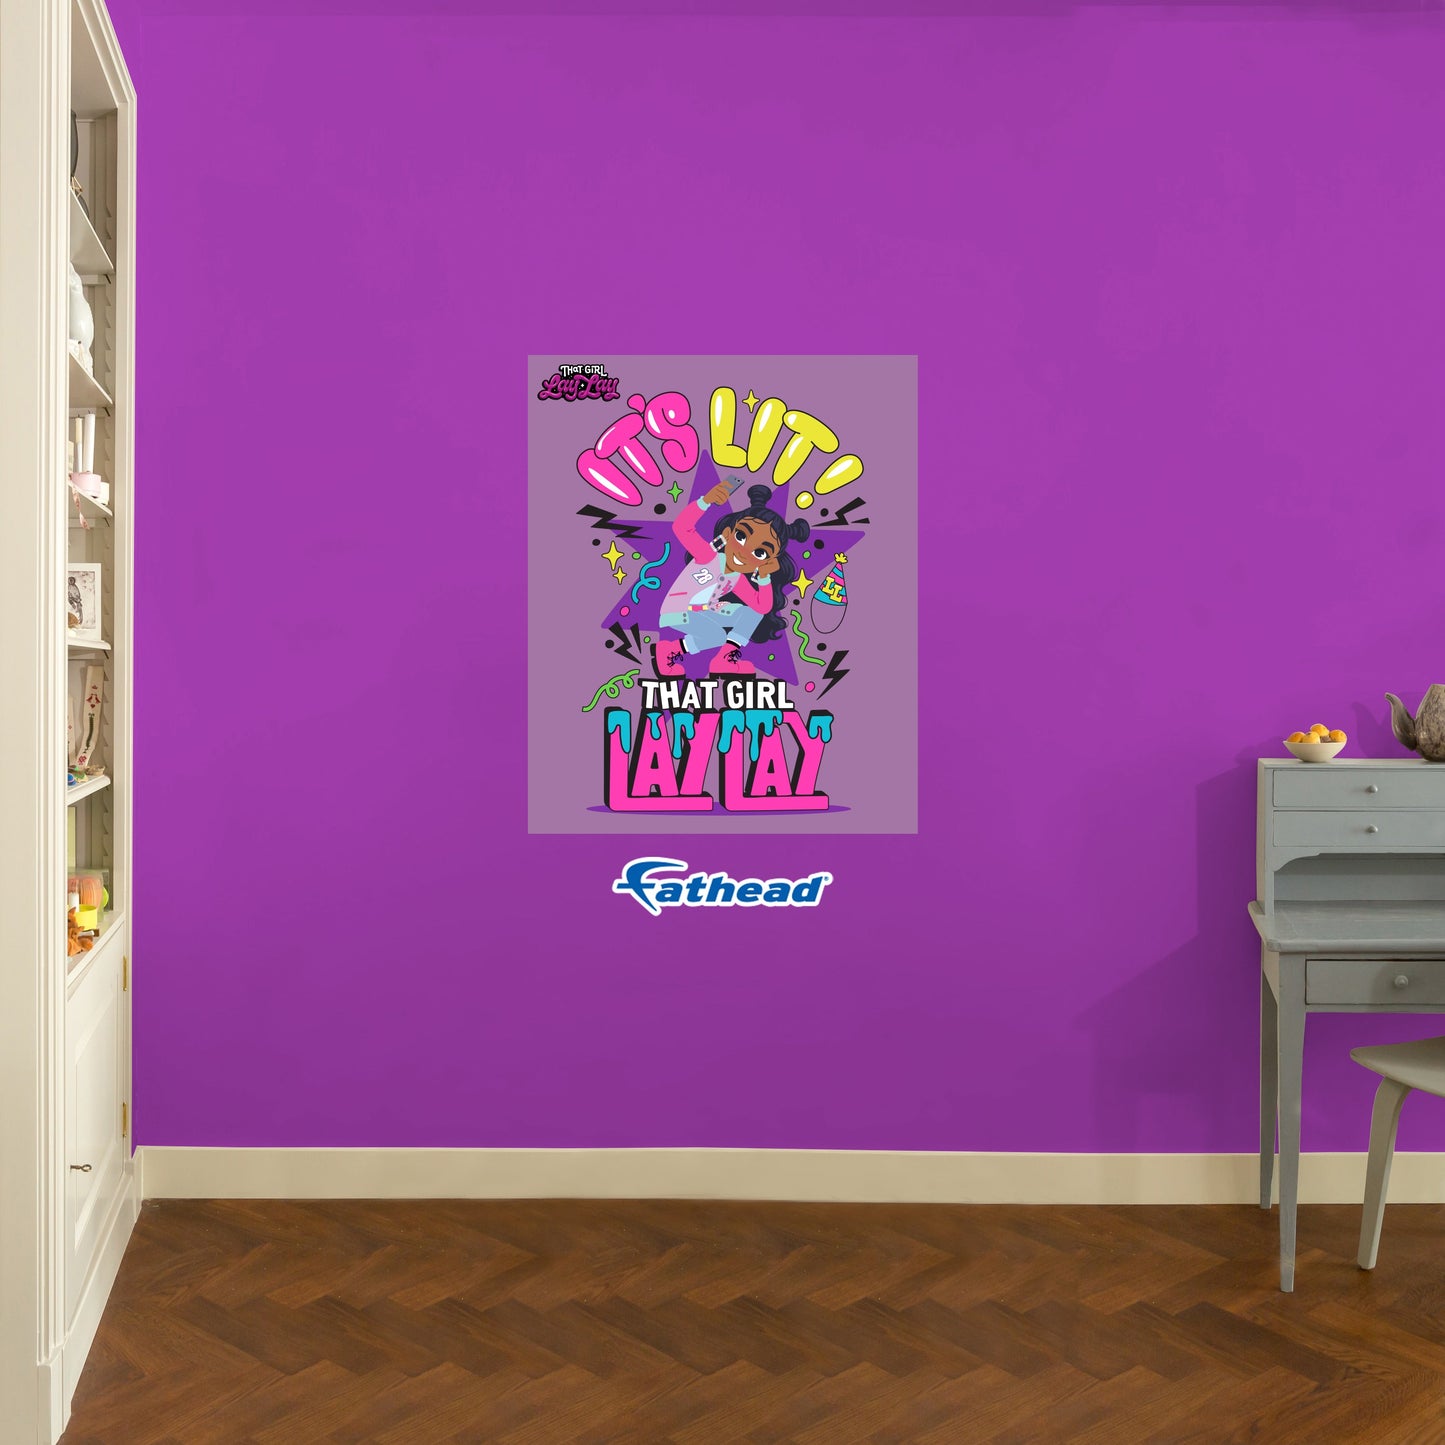 That Girl Lay Lay: It's Lit Poster - Officially Licensed Nickelodeon Removable Adhesive Decal